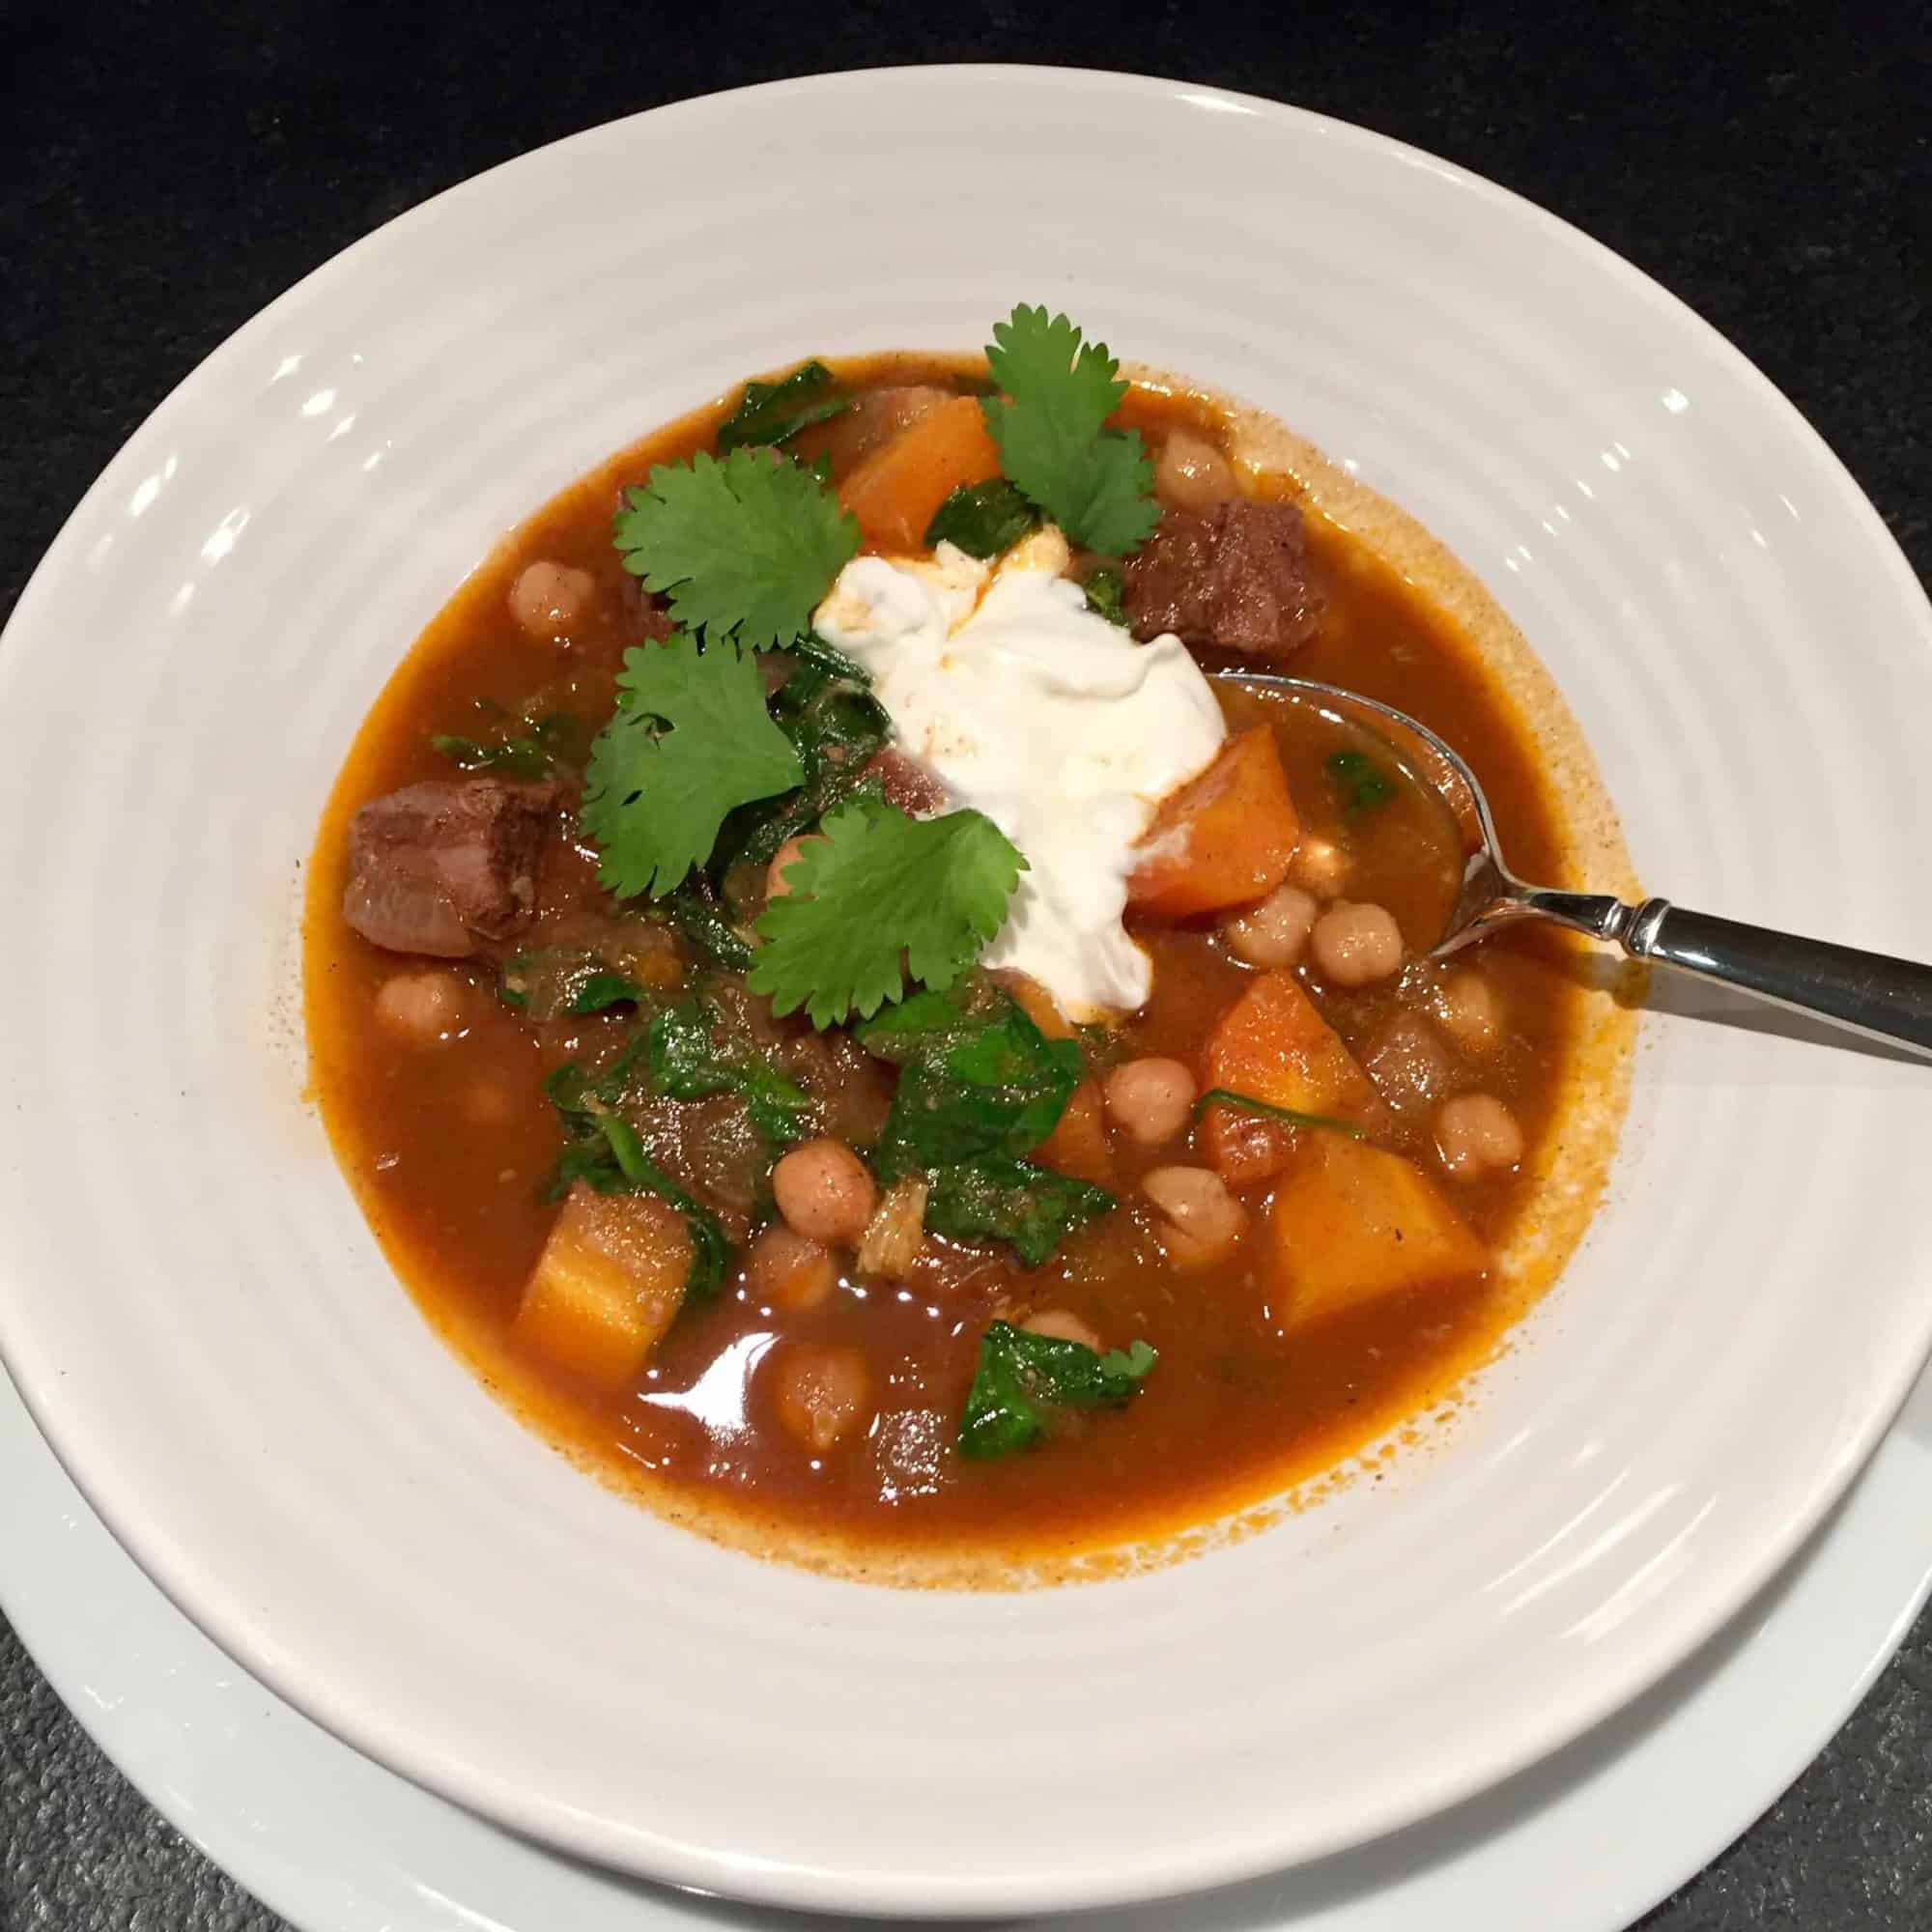 Christmas Cookbooks Continued: Christopher Kimball’s “Milk Street The New Home Cooking” and his recipe for No-Sear Lamb and Chickpea Stew